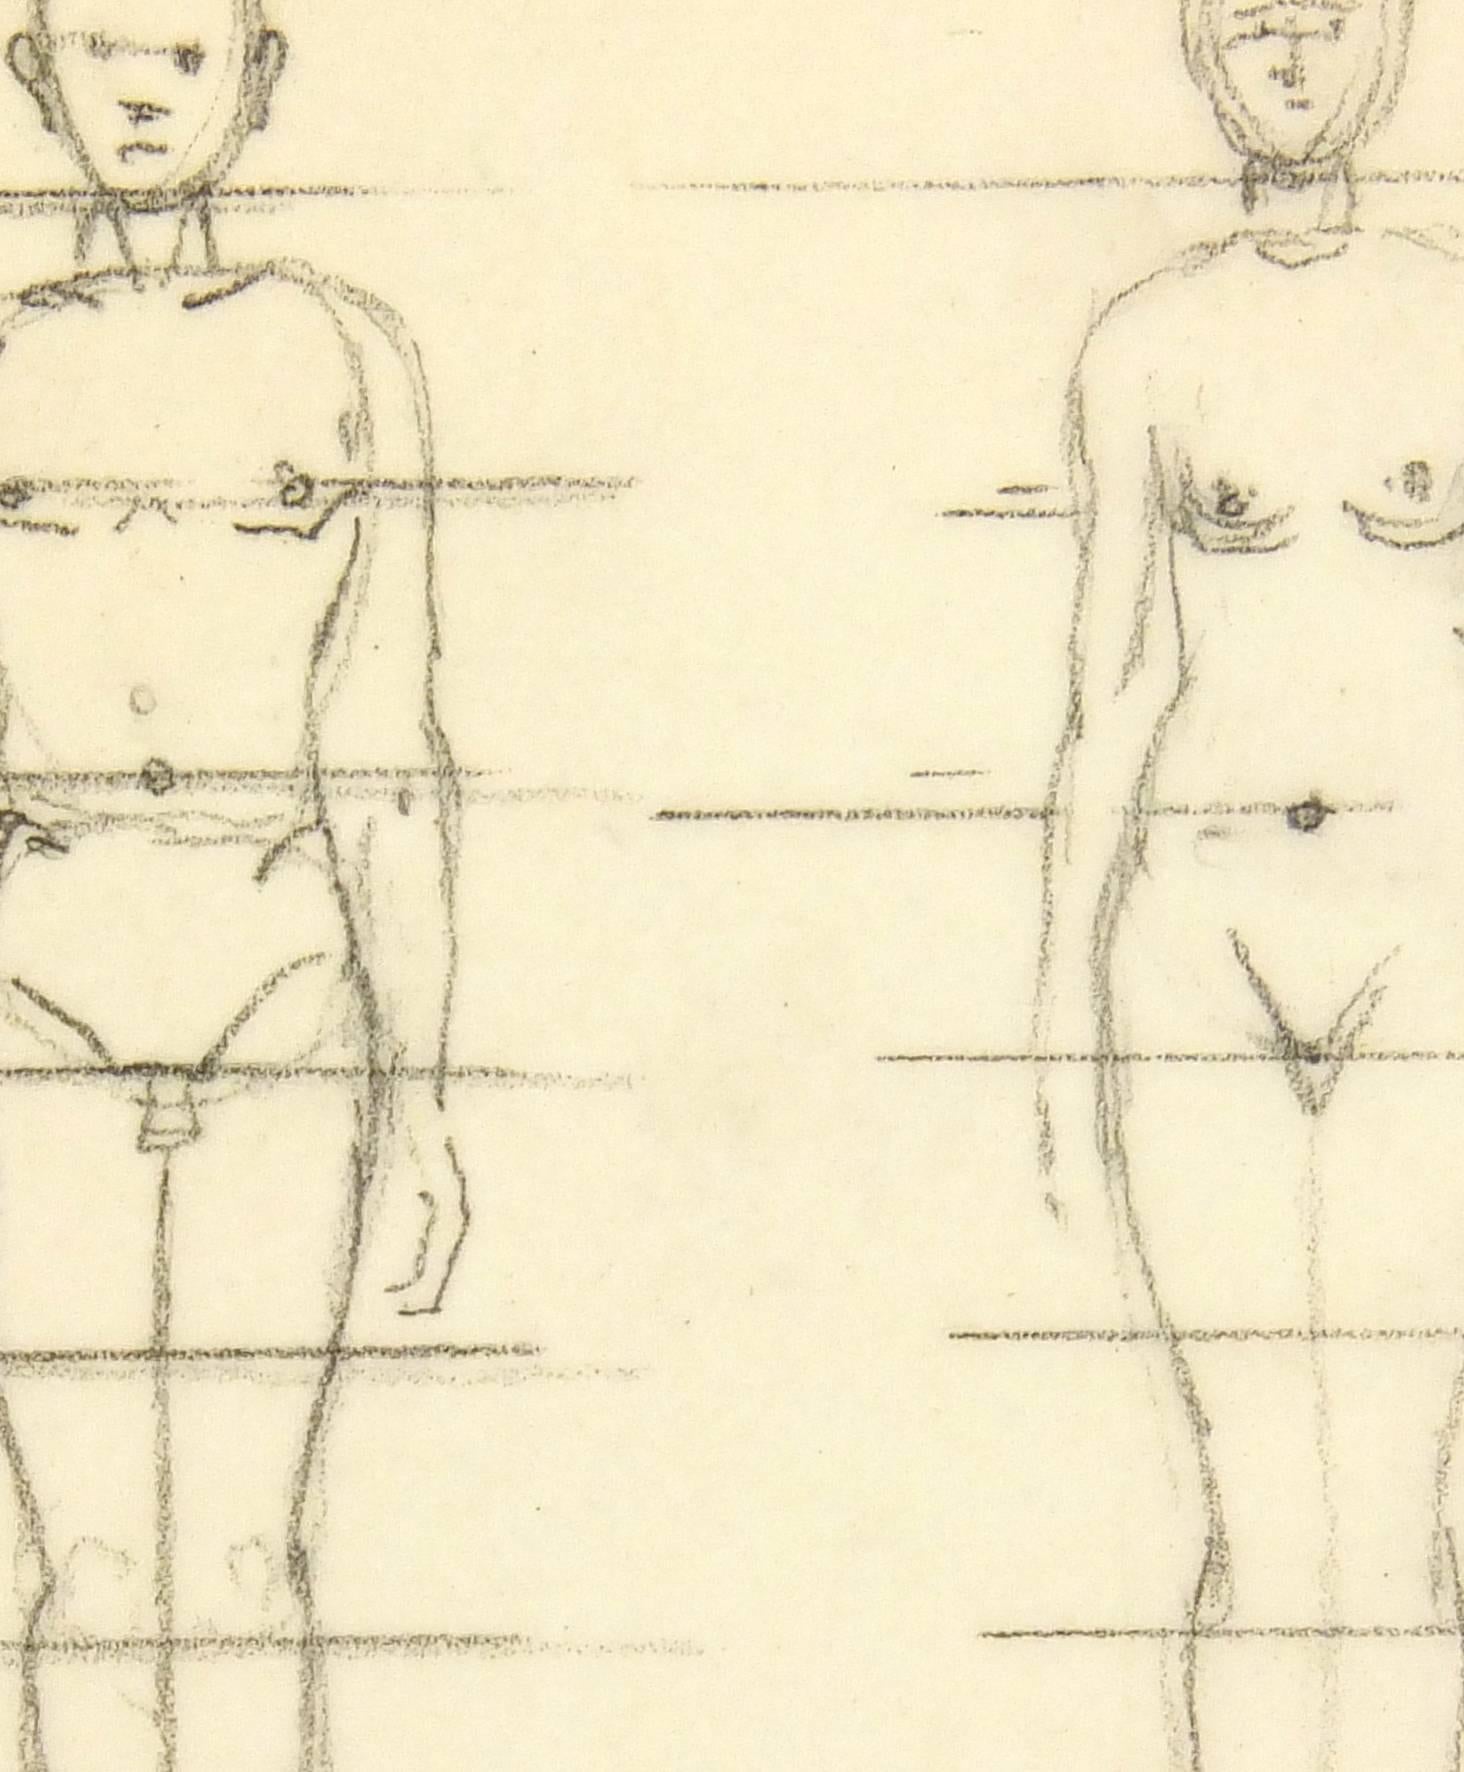 Nudes - Profile Sketches II - Art by Werner Bell